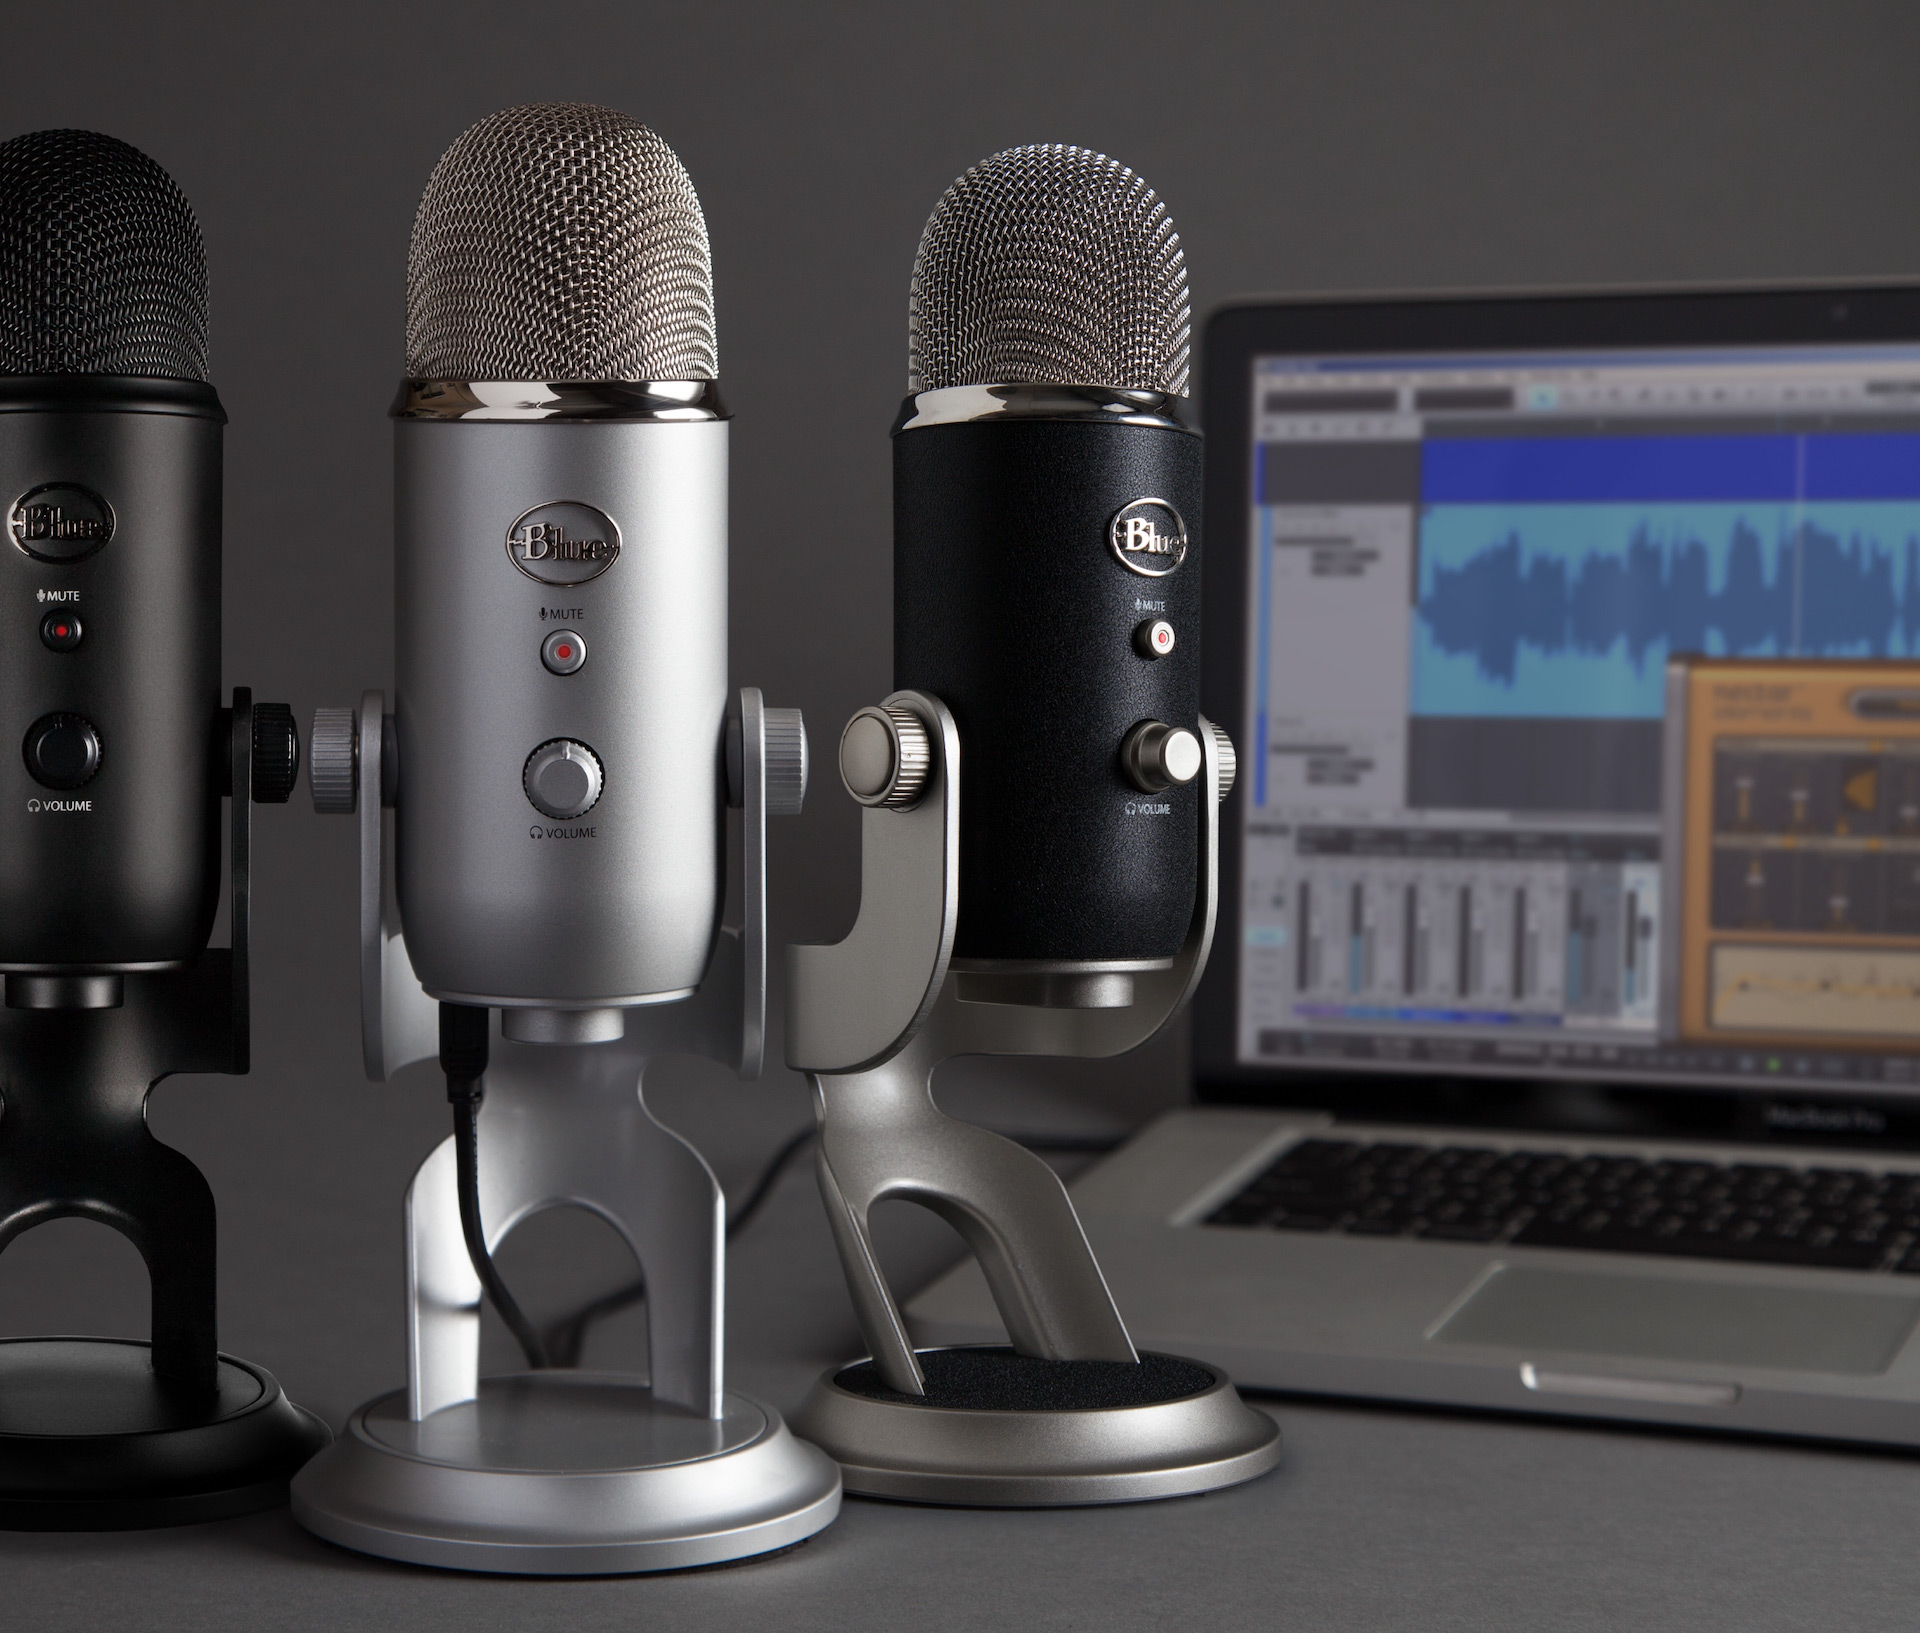 The Blue Yeti series is not the best choice for serious podcasters.